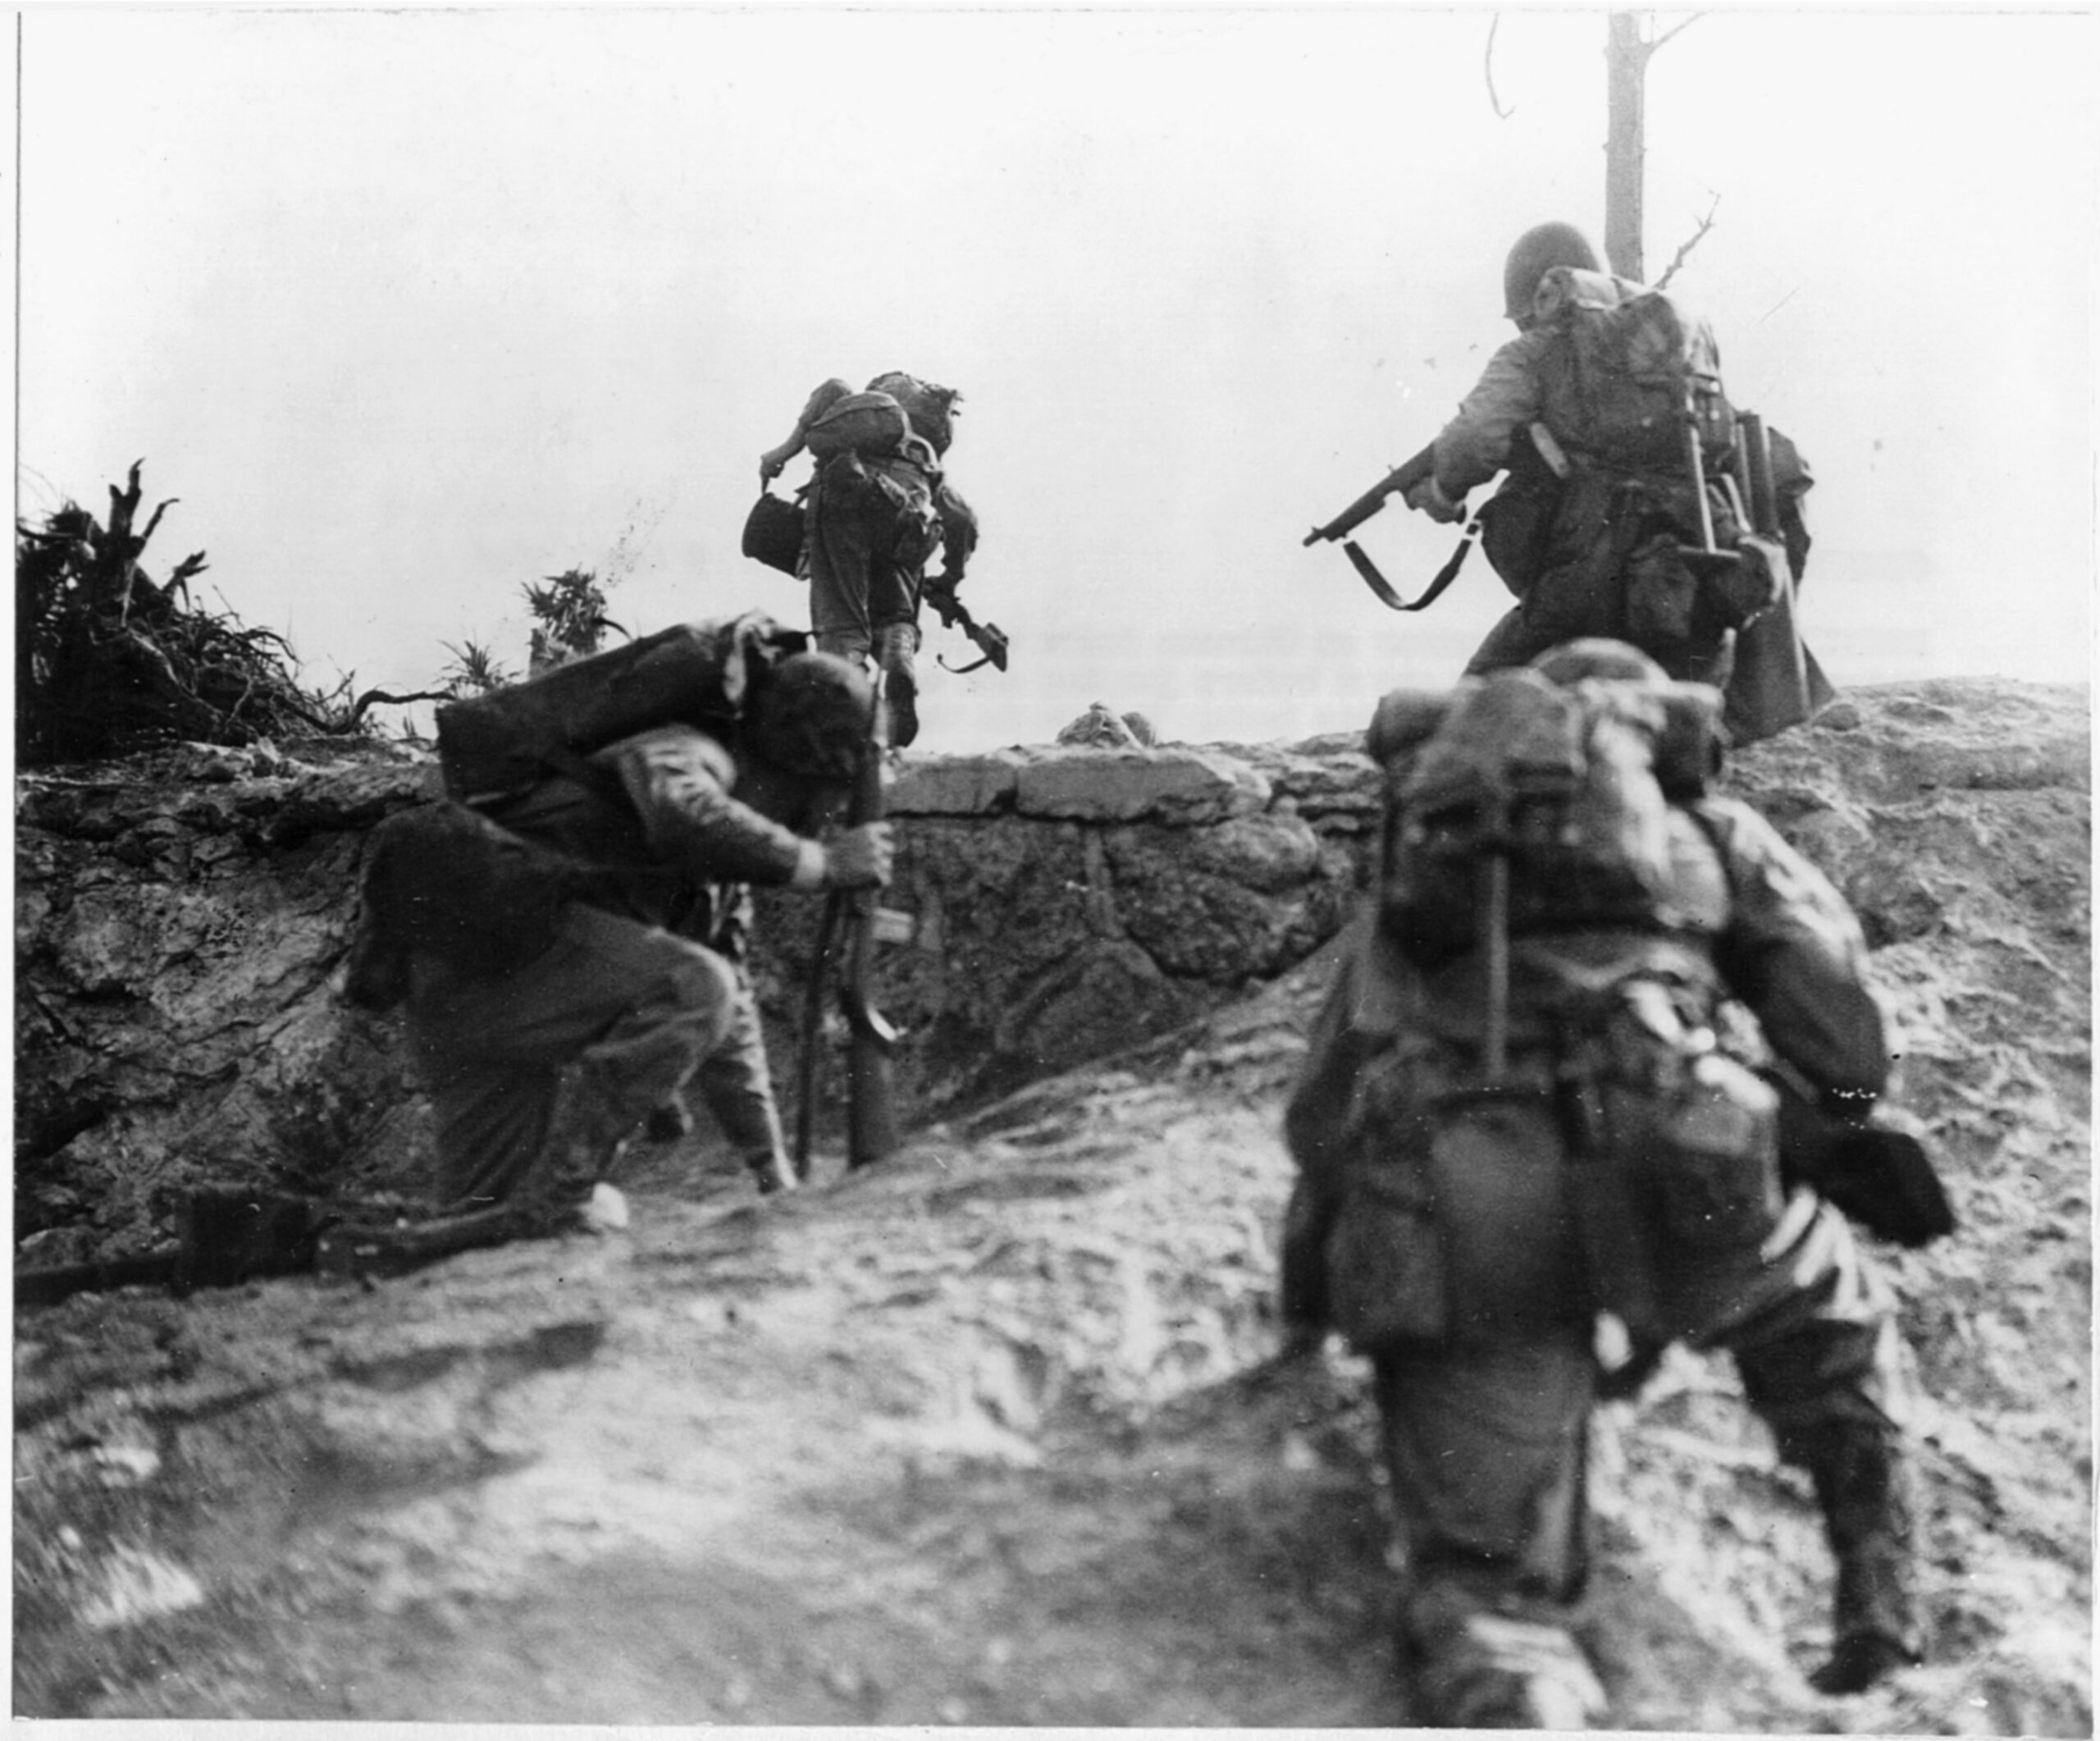 Marines advancing on the run. Two are carrying communications wire and radio equipment to stay in contact with other units.